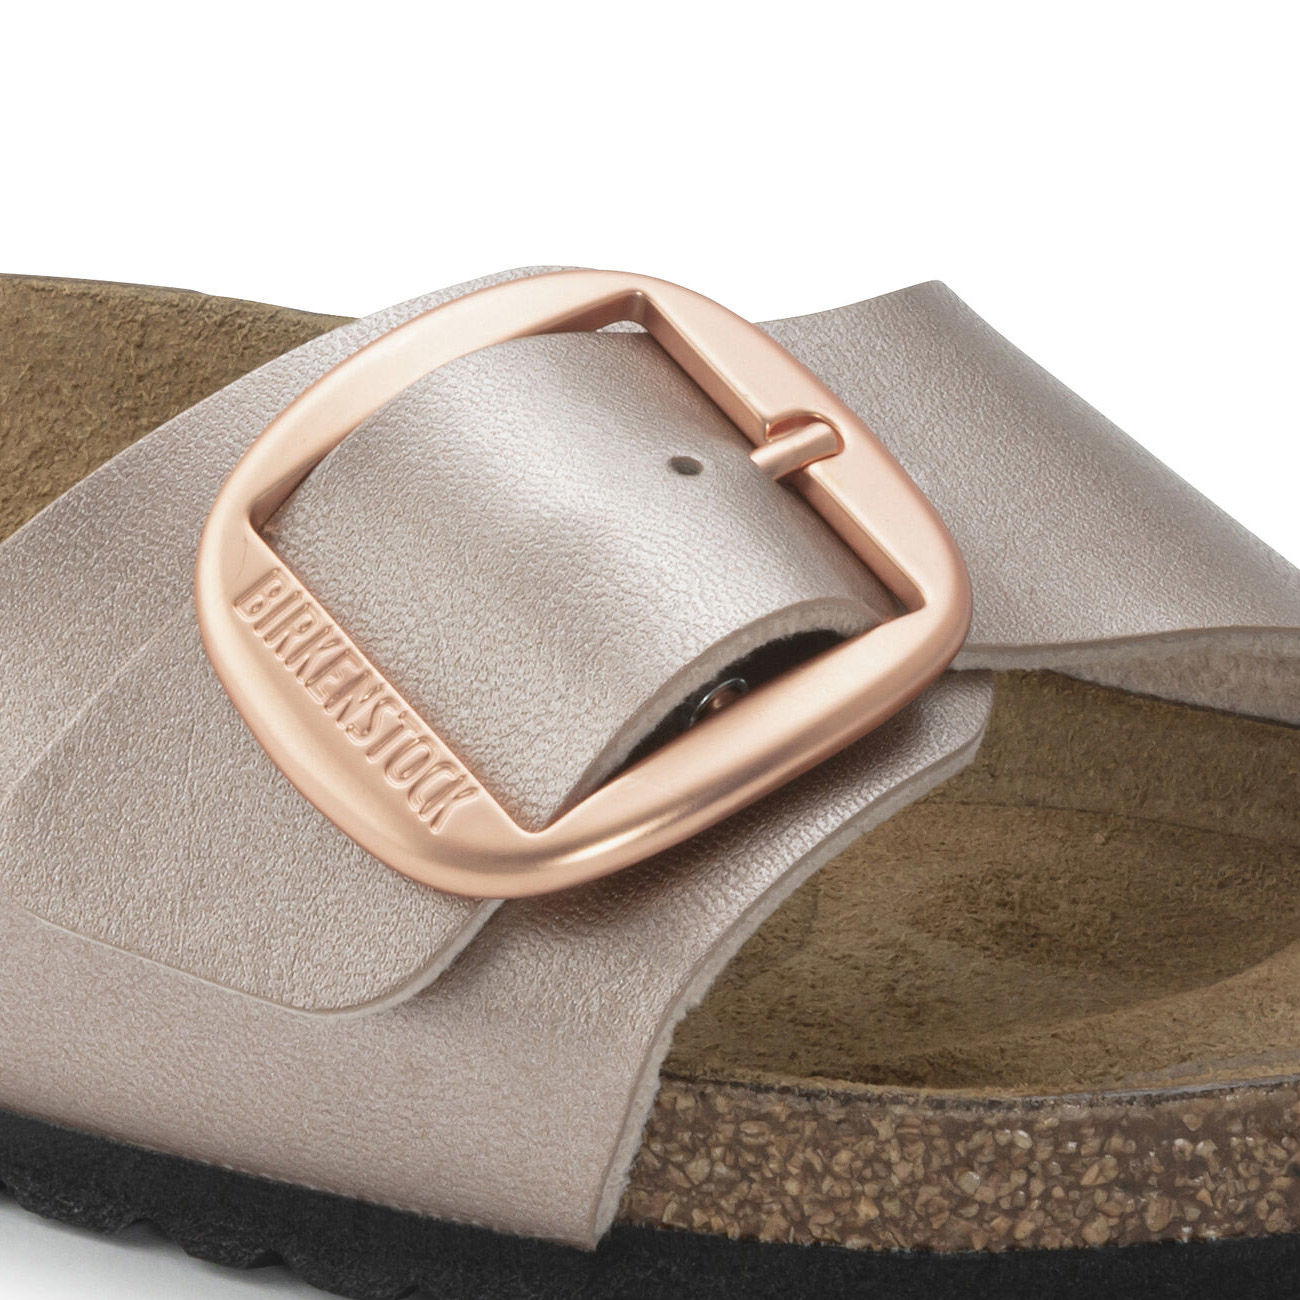 BIRKENSTOCK introduces a collection of eye-catching Milano sandals